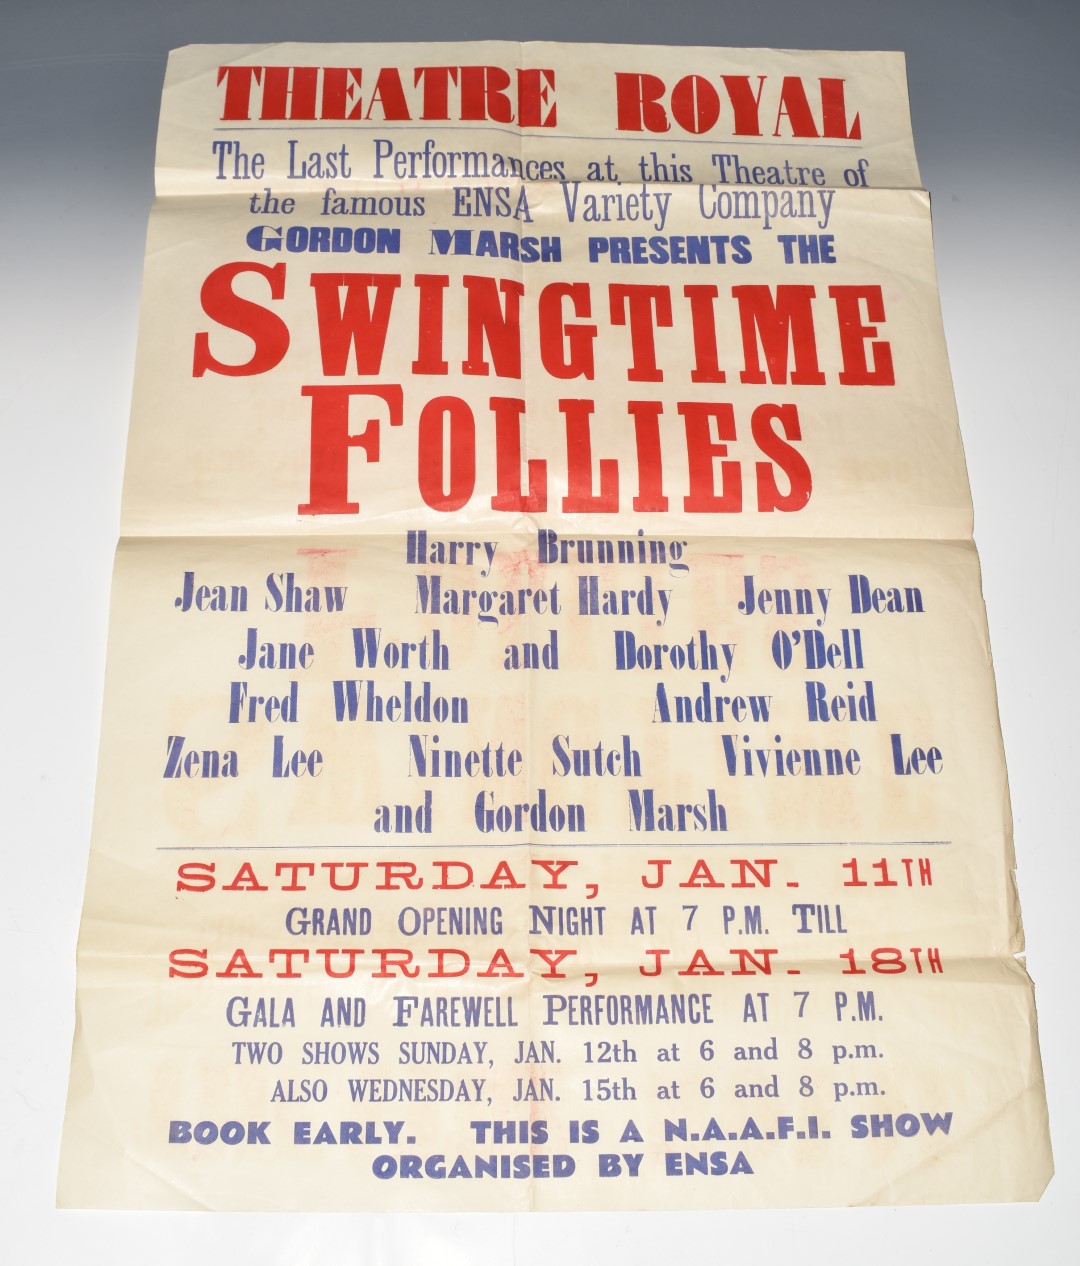 WW2 ENSA interest poster for the Swingtime Follies last performance at the Theatre Royal, 51 x - Image 2 of 6